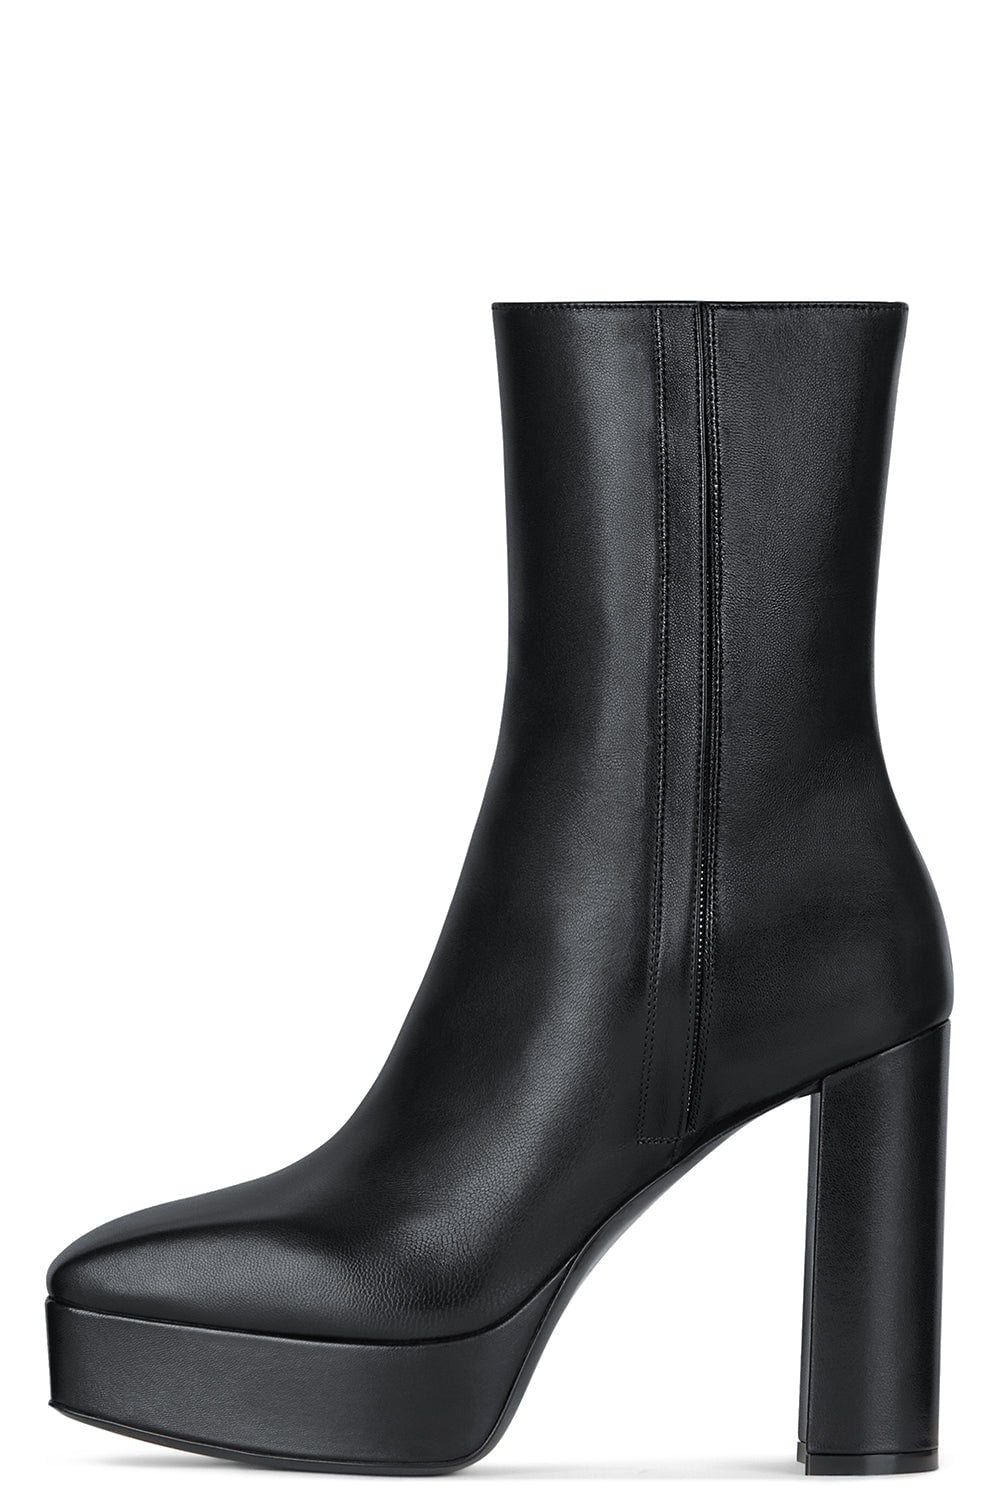 GIVENCHY-G Lock Platform Ankle Booties-